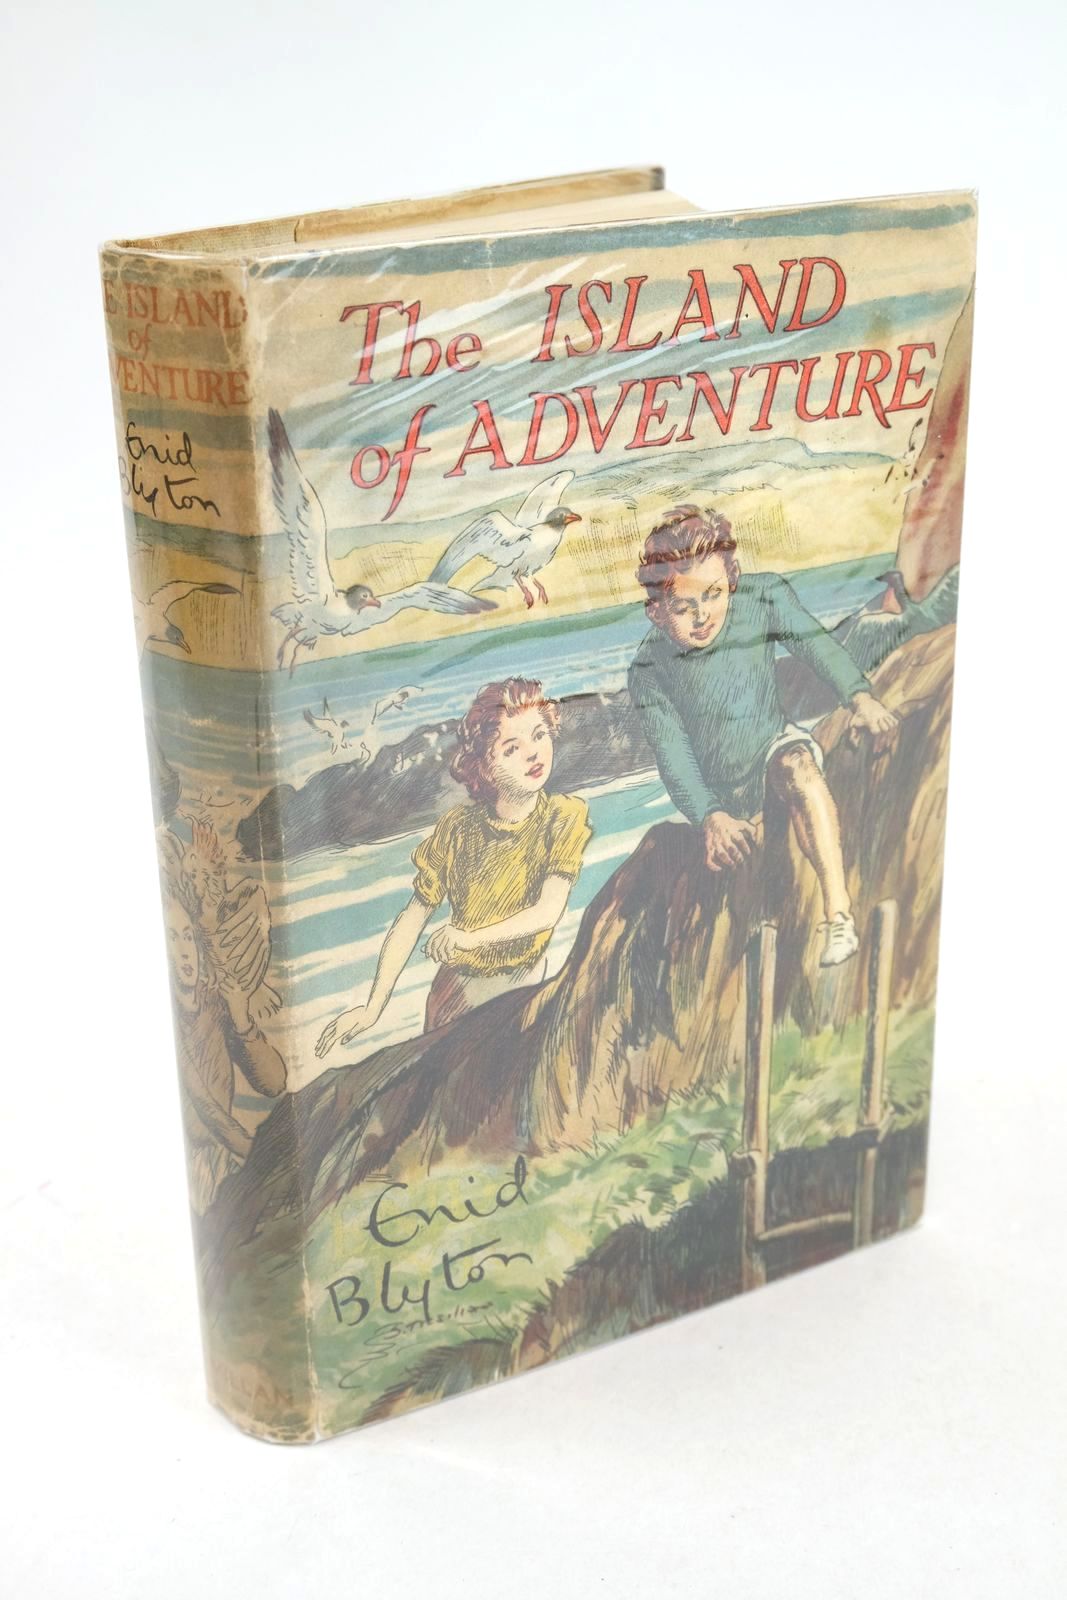 Photo of THE ISLAND OF ADVENTURE written by Blyton, Enid illustrated by Tresilian, Stuart published by Macmillan &amp; Co. Ltd. (STOCK CODE: 1325705)  for sale by Stella & Rose's Books